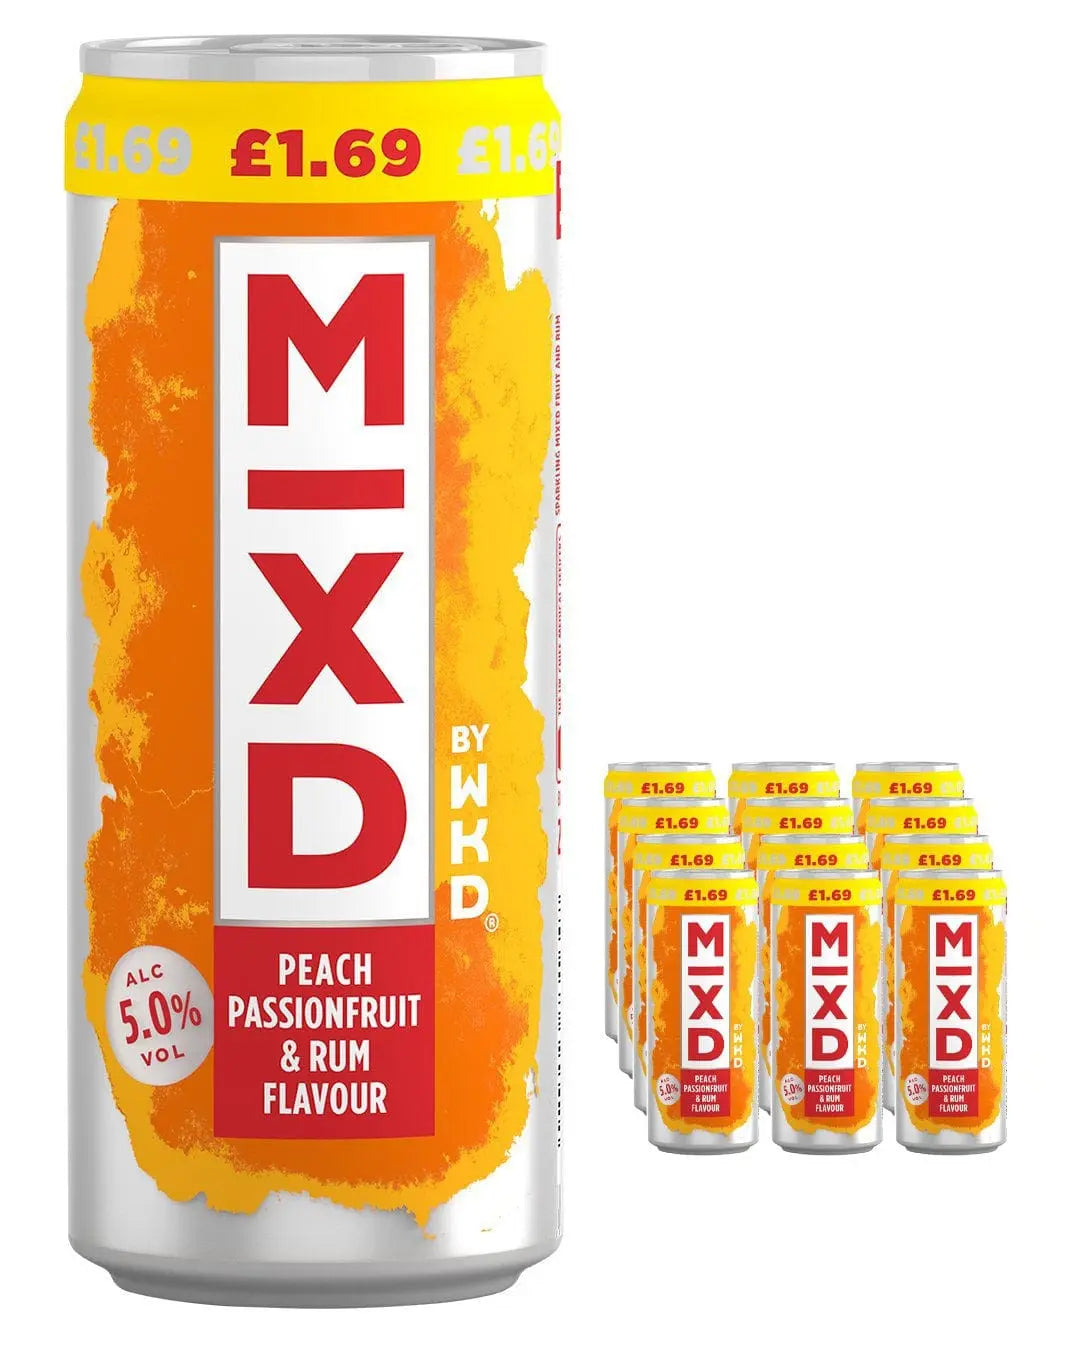 WKD Mixed Peach, Passionfruit & Rum Premixed Can Multipack, 12 x 250 ml Ready Made Cocktails